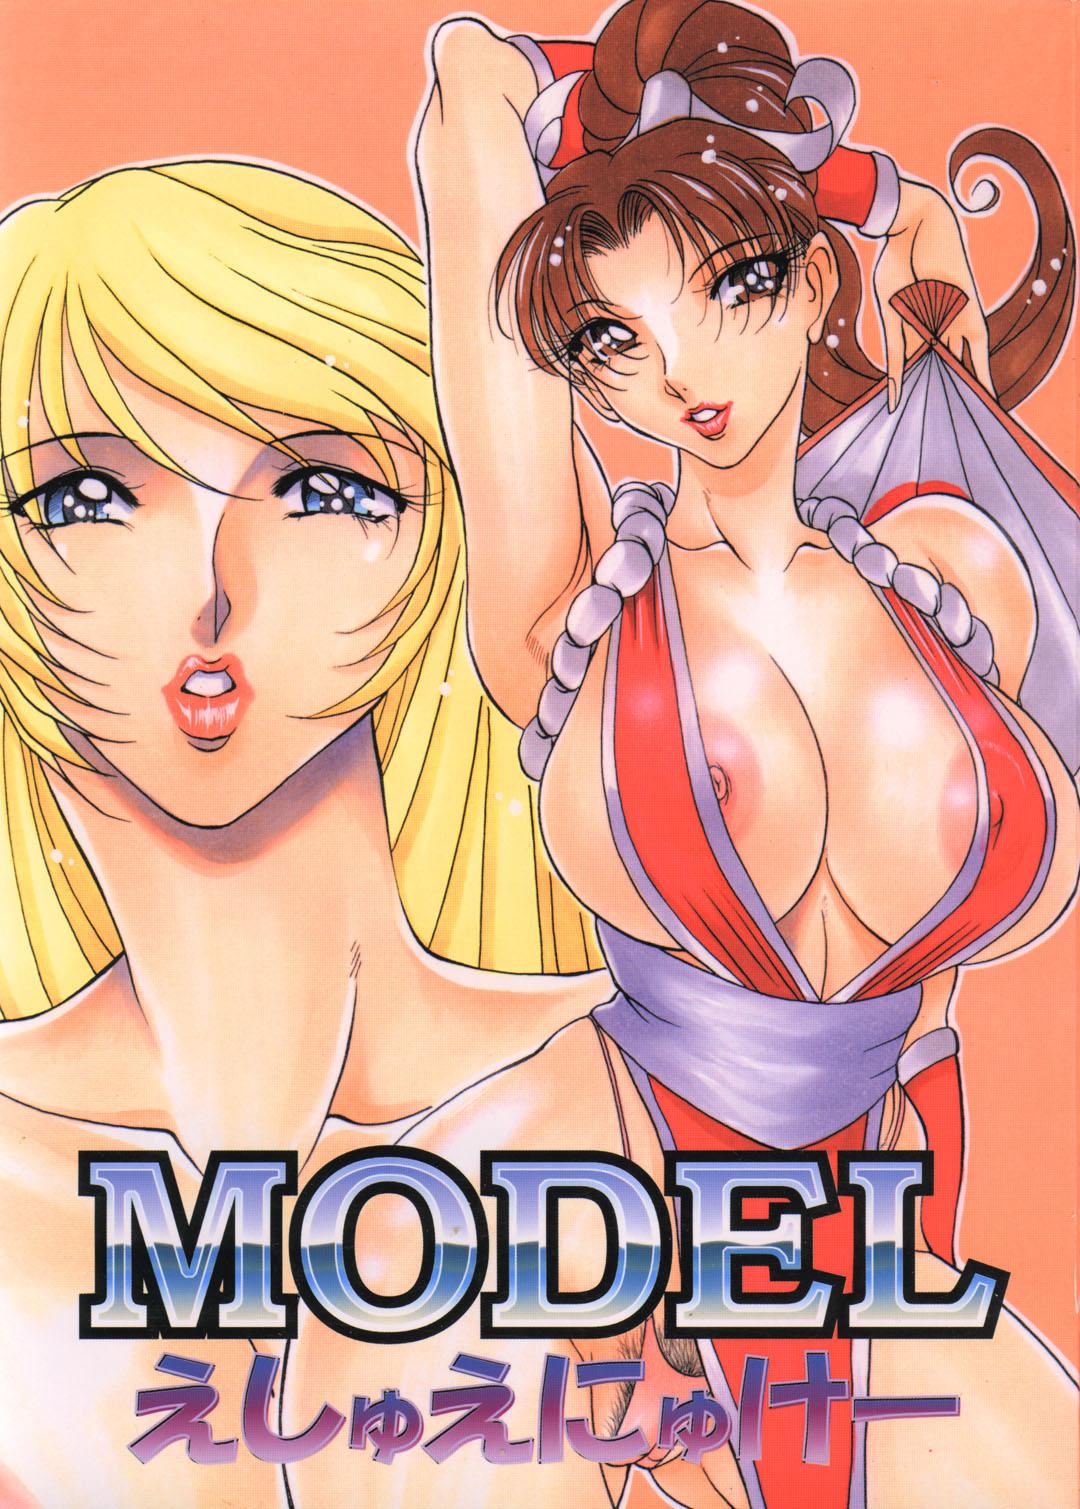 Thailand MODEL SNK - King of fighters Samurai spirits Fatal fury Cumming - Page 1